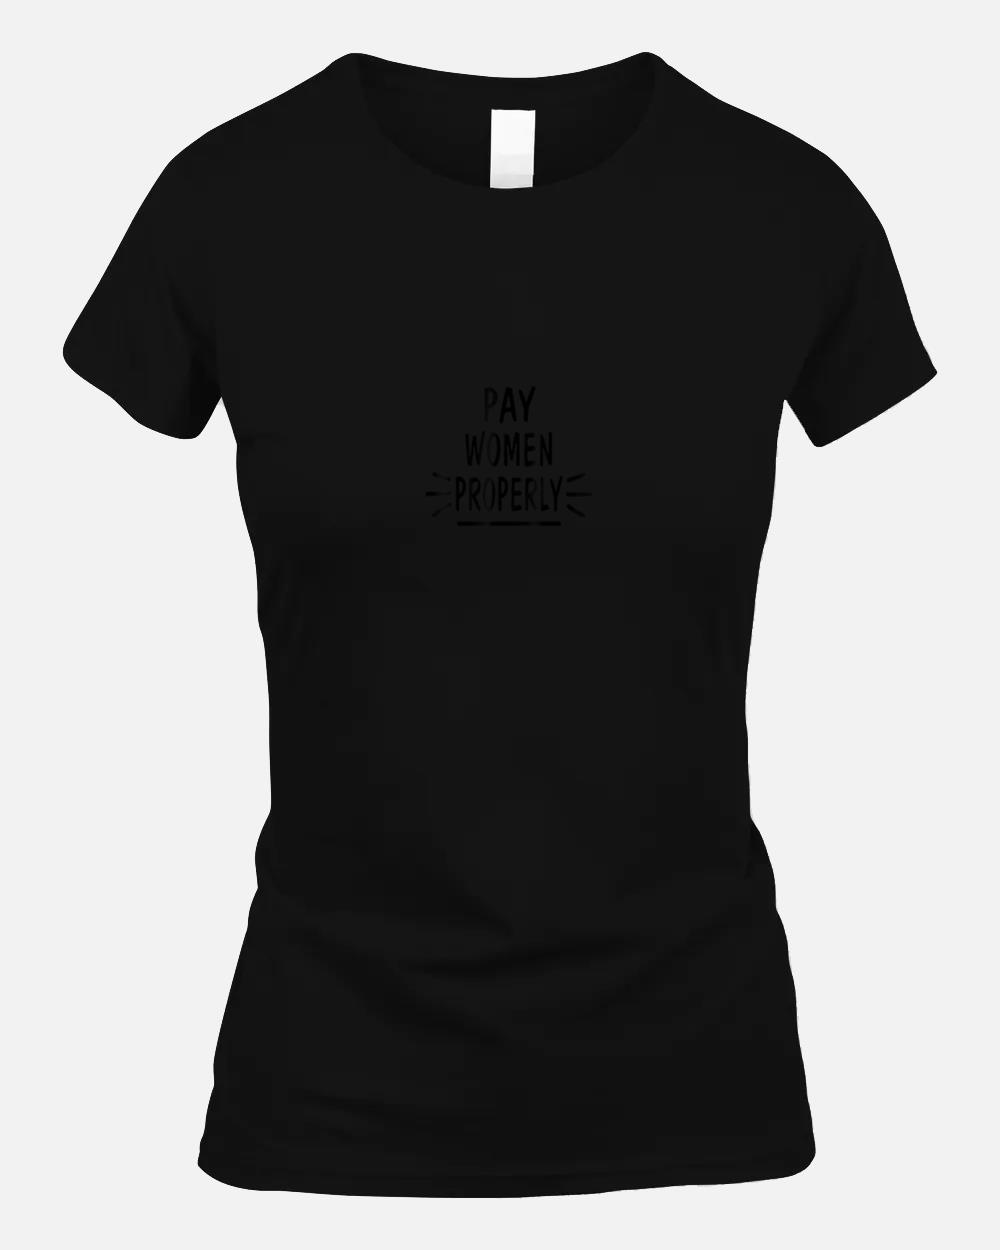 pay women properly if you ain't got it just say that Unisex T-Shirt